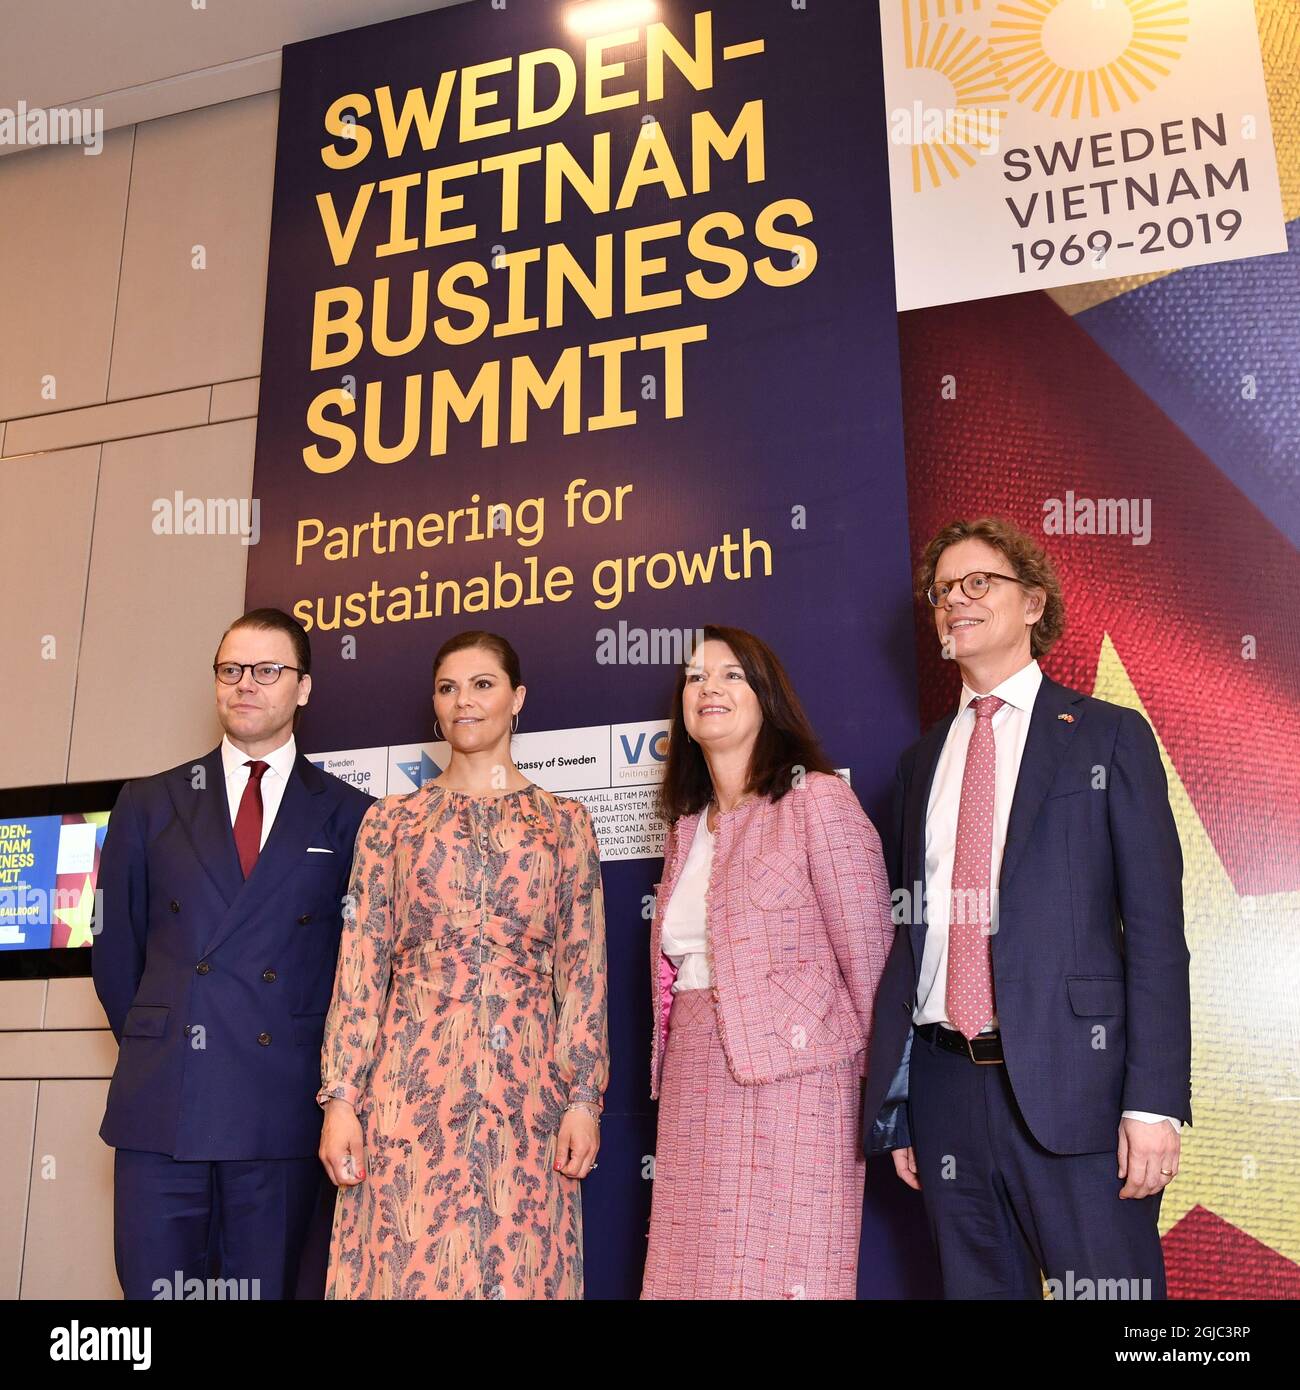 Prince Daniel, Crown Princess Victoria, Minister for Foreign Trade Ann Linde and Pereric H0gberg Sweden's Ambasador to Vietnam during the Sweden Hanoi business summit in Hanoi, Vietnam, Tuesday, May 7, 2019. Crown Princess Victoria and Prince Daniel are visiting Vietnam for three days Photo: Jonas Ekstromer / TT kod 10030 Stock Photo